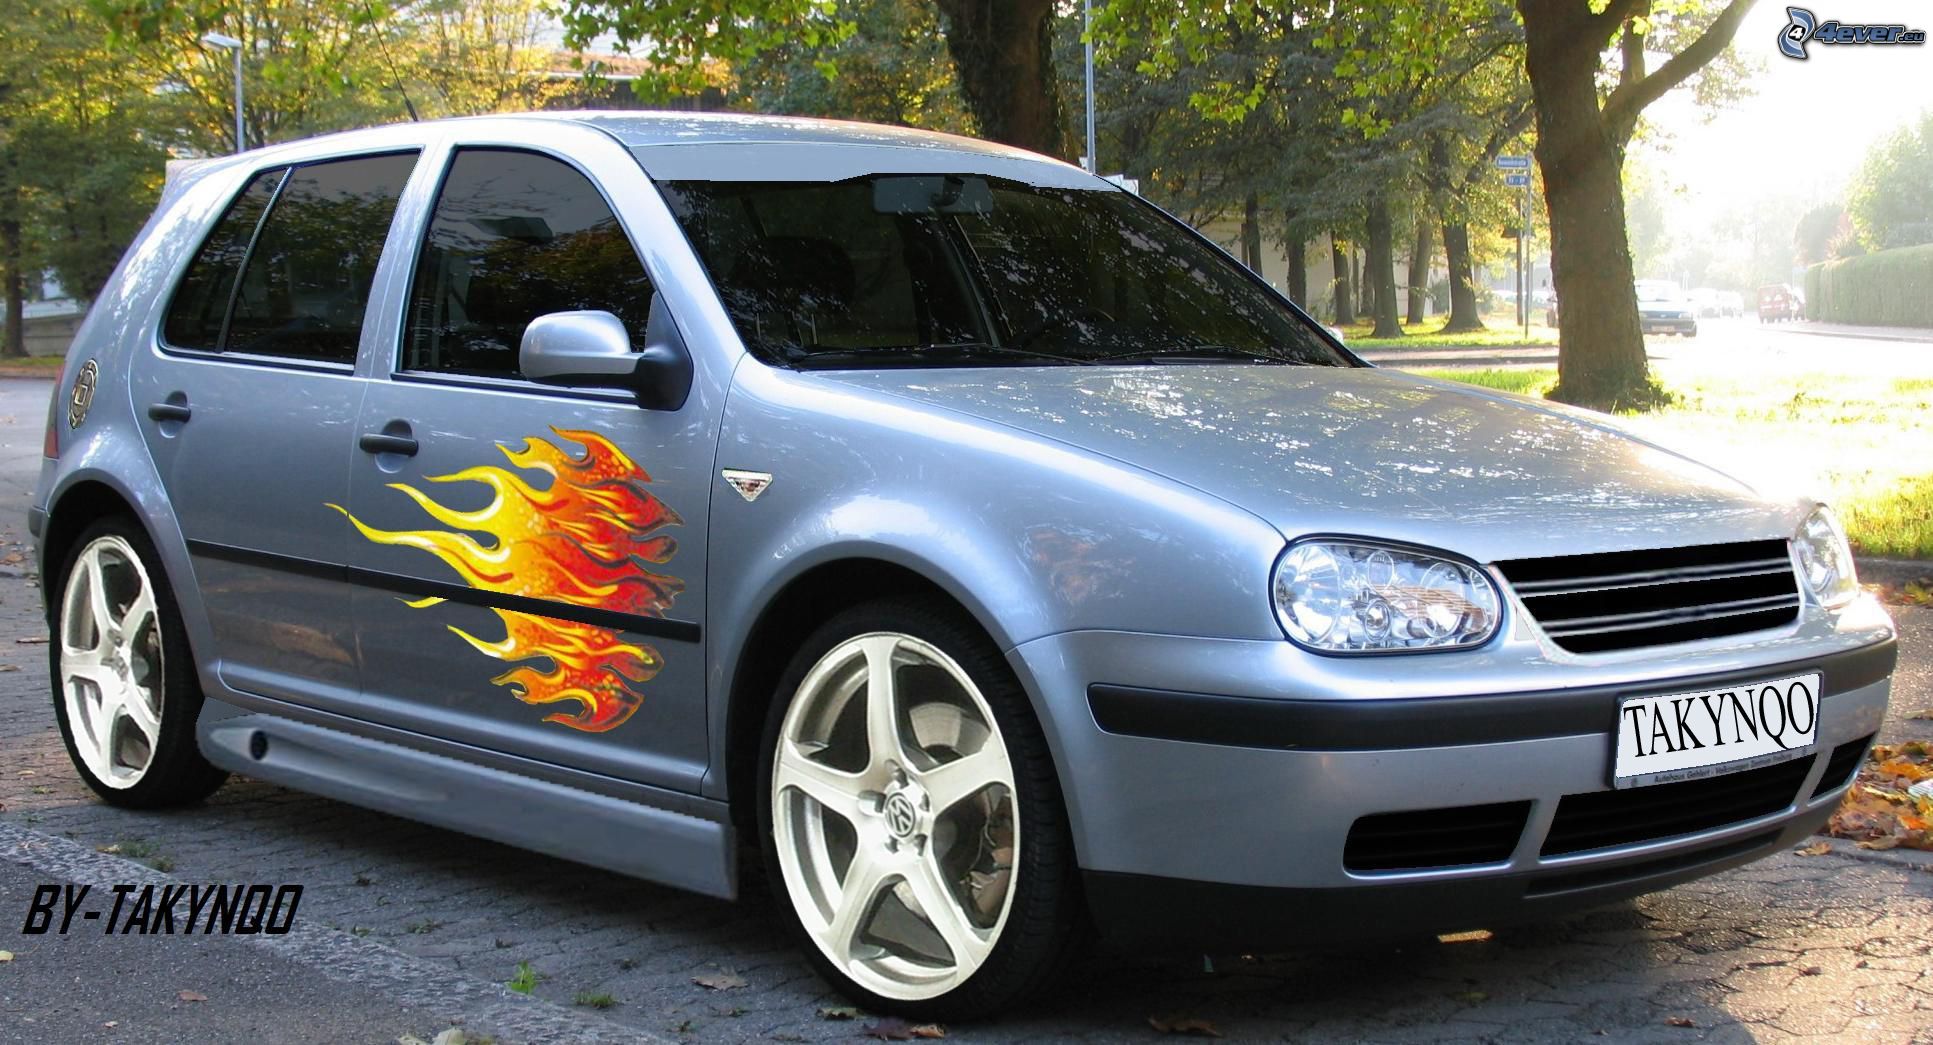 http://pictures.4ever.eu/data/download/cars/tuning/volkswagen-golf,-virtual-tuning-144811.jpg?no-logo